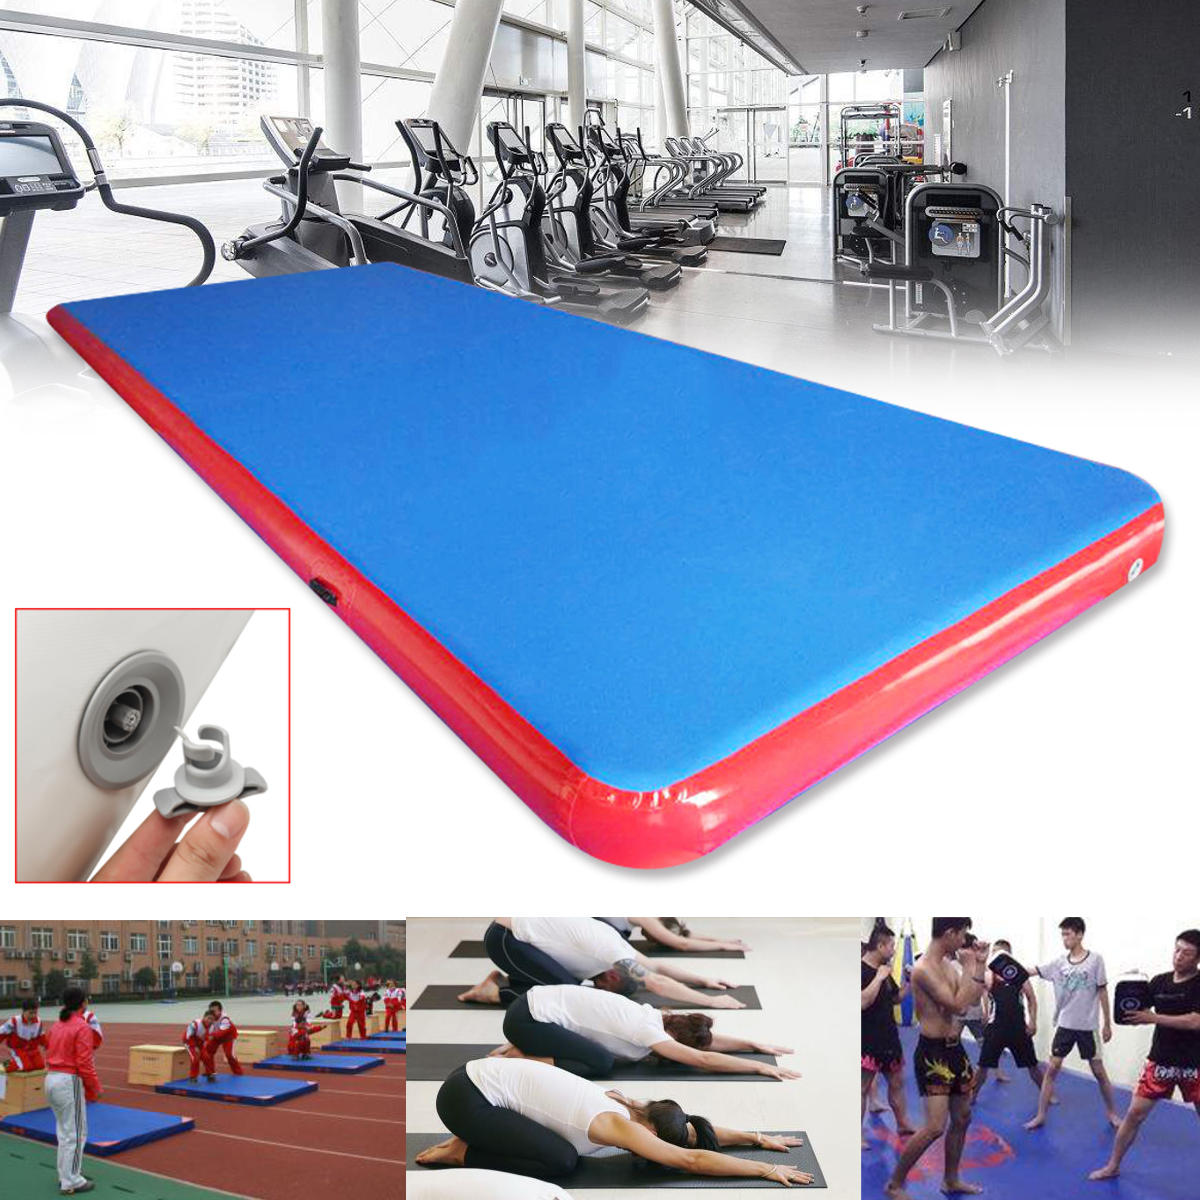 236.2 x 78.74inch nflatable GYM Air Track Mat Airtrack Gymnastics Mat Tumbling Practice Training Pad With Repair Kit